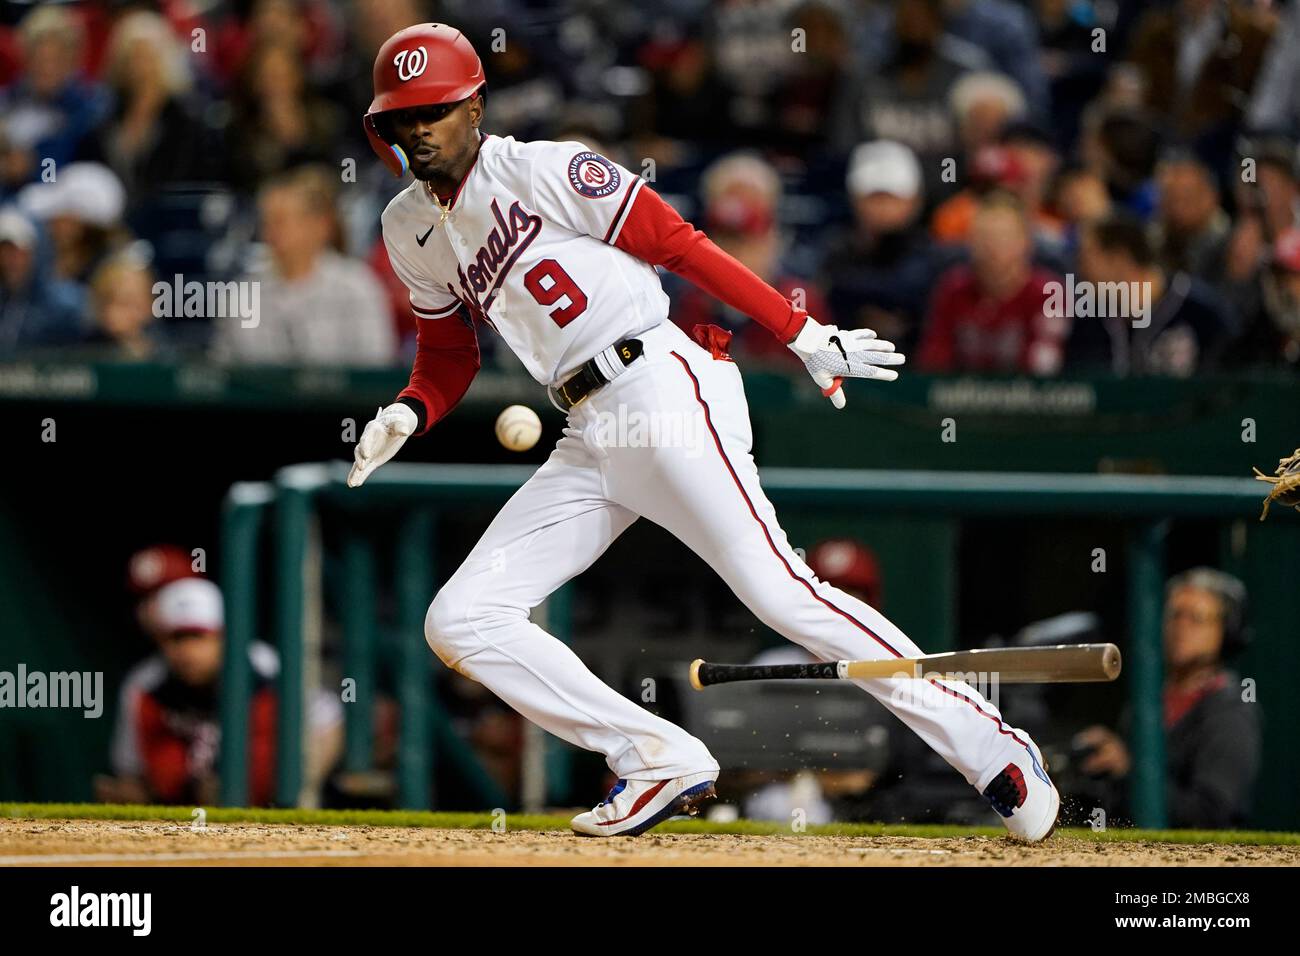 WASHINGTON, DC - APRIL 10: Washington Nationals second baseman Dee Strange- Gordon (9) heads for third during a MLB game between the Washington  Nationals and the New York Mets, on April 10, 2022